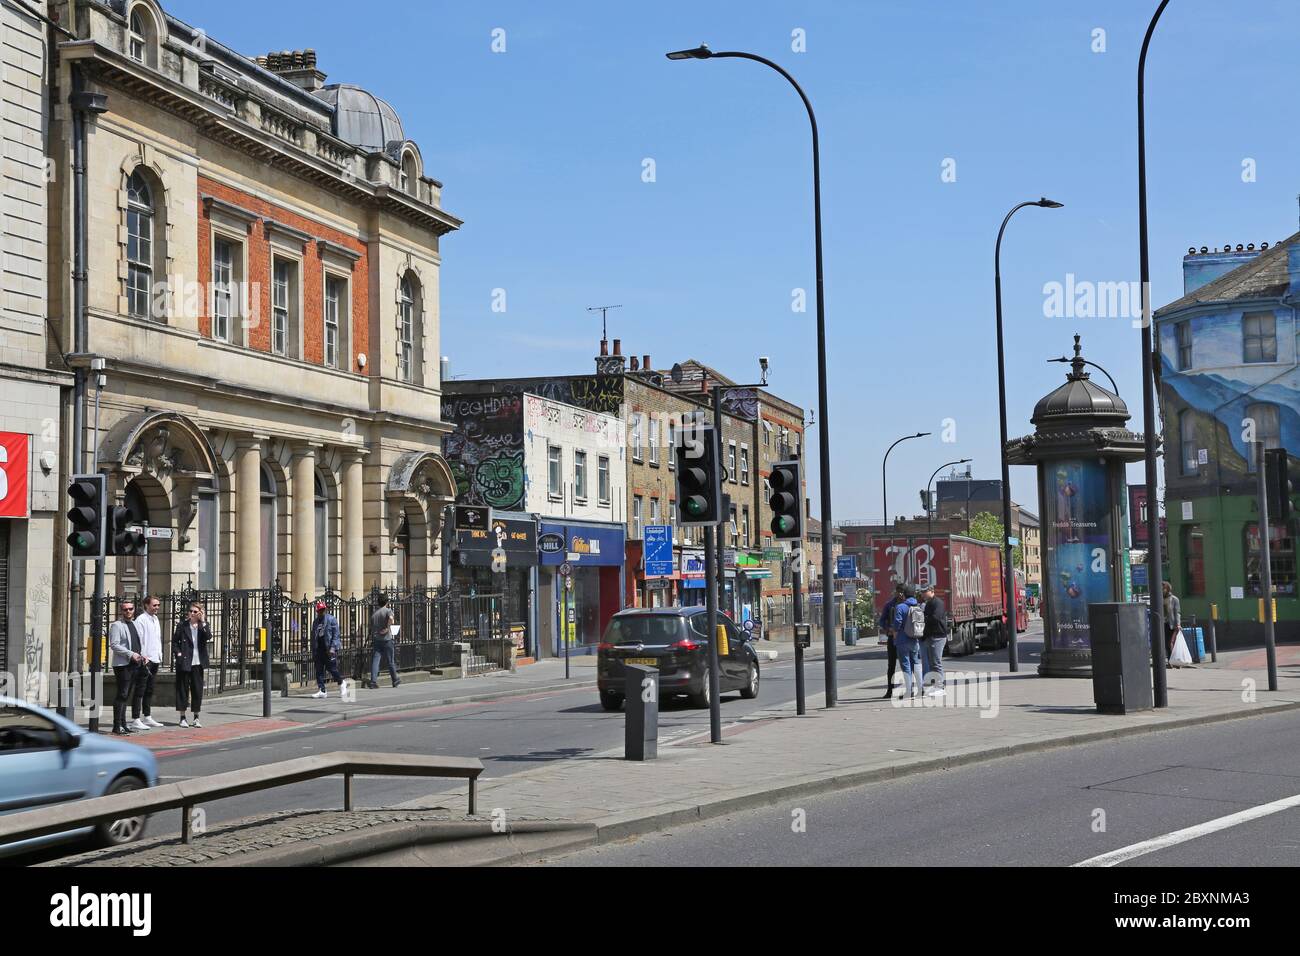 The one way road system at New Cross Gate, souteast London UK. Junction of New Cross Road (A2) and Lewisham Way A(20) Stock Photo